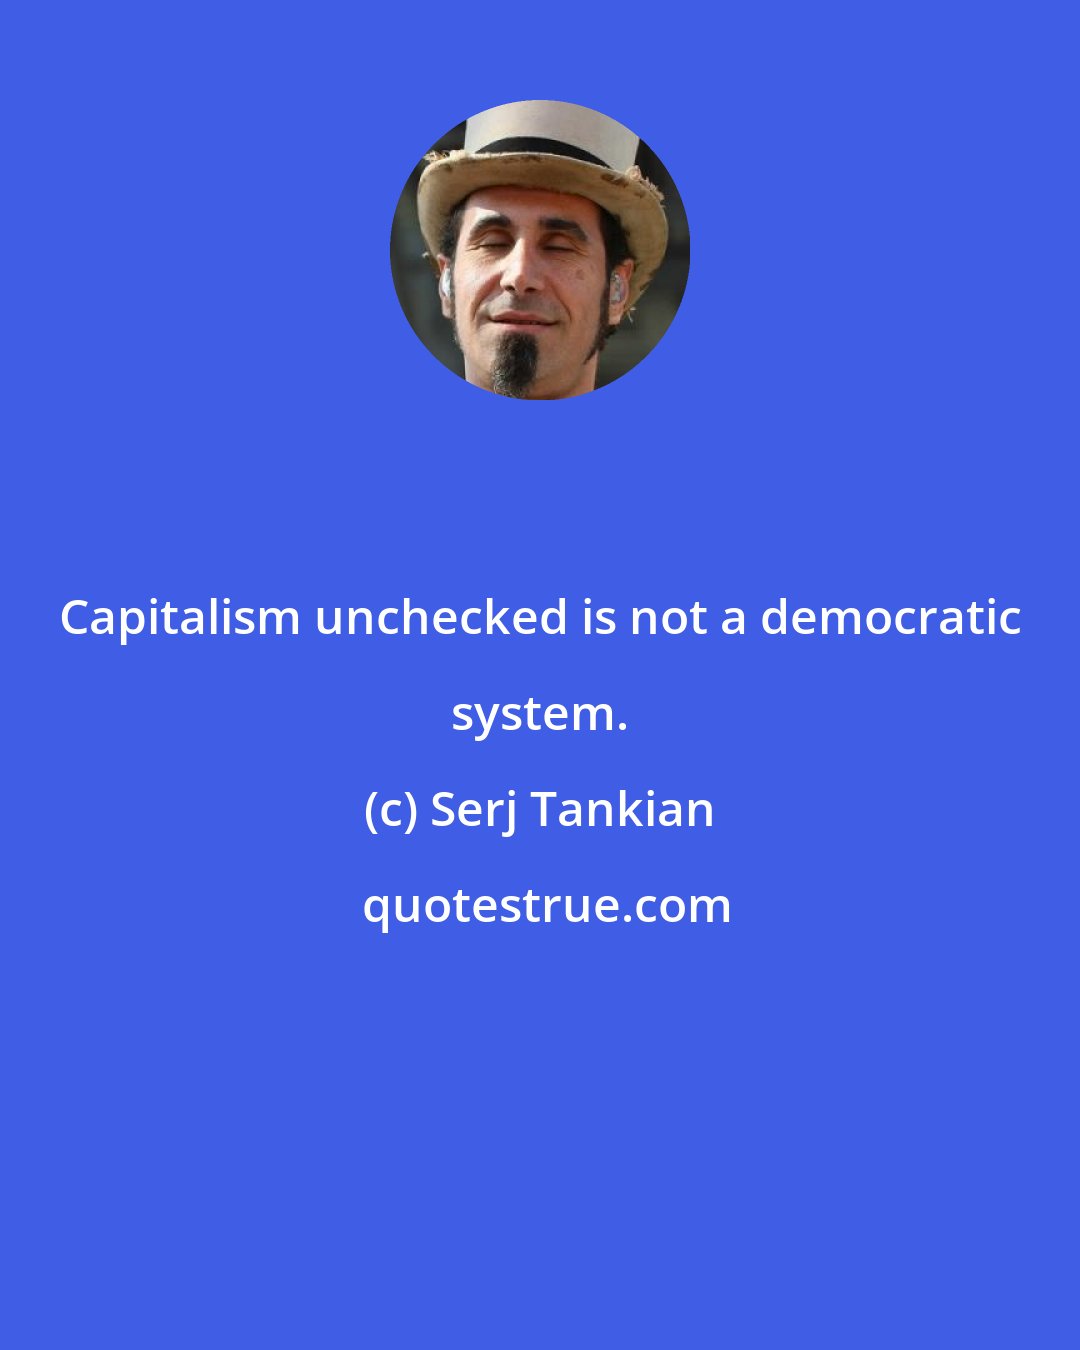 Serj Tankian: Capitalism unchecked is not a democratic system.